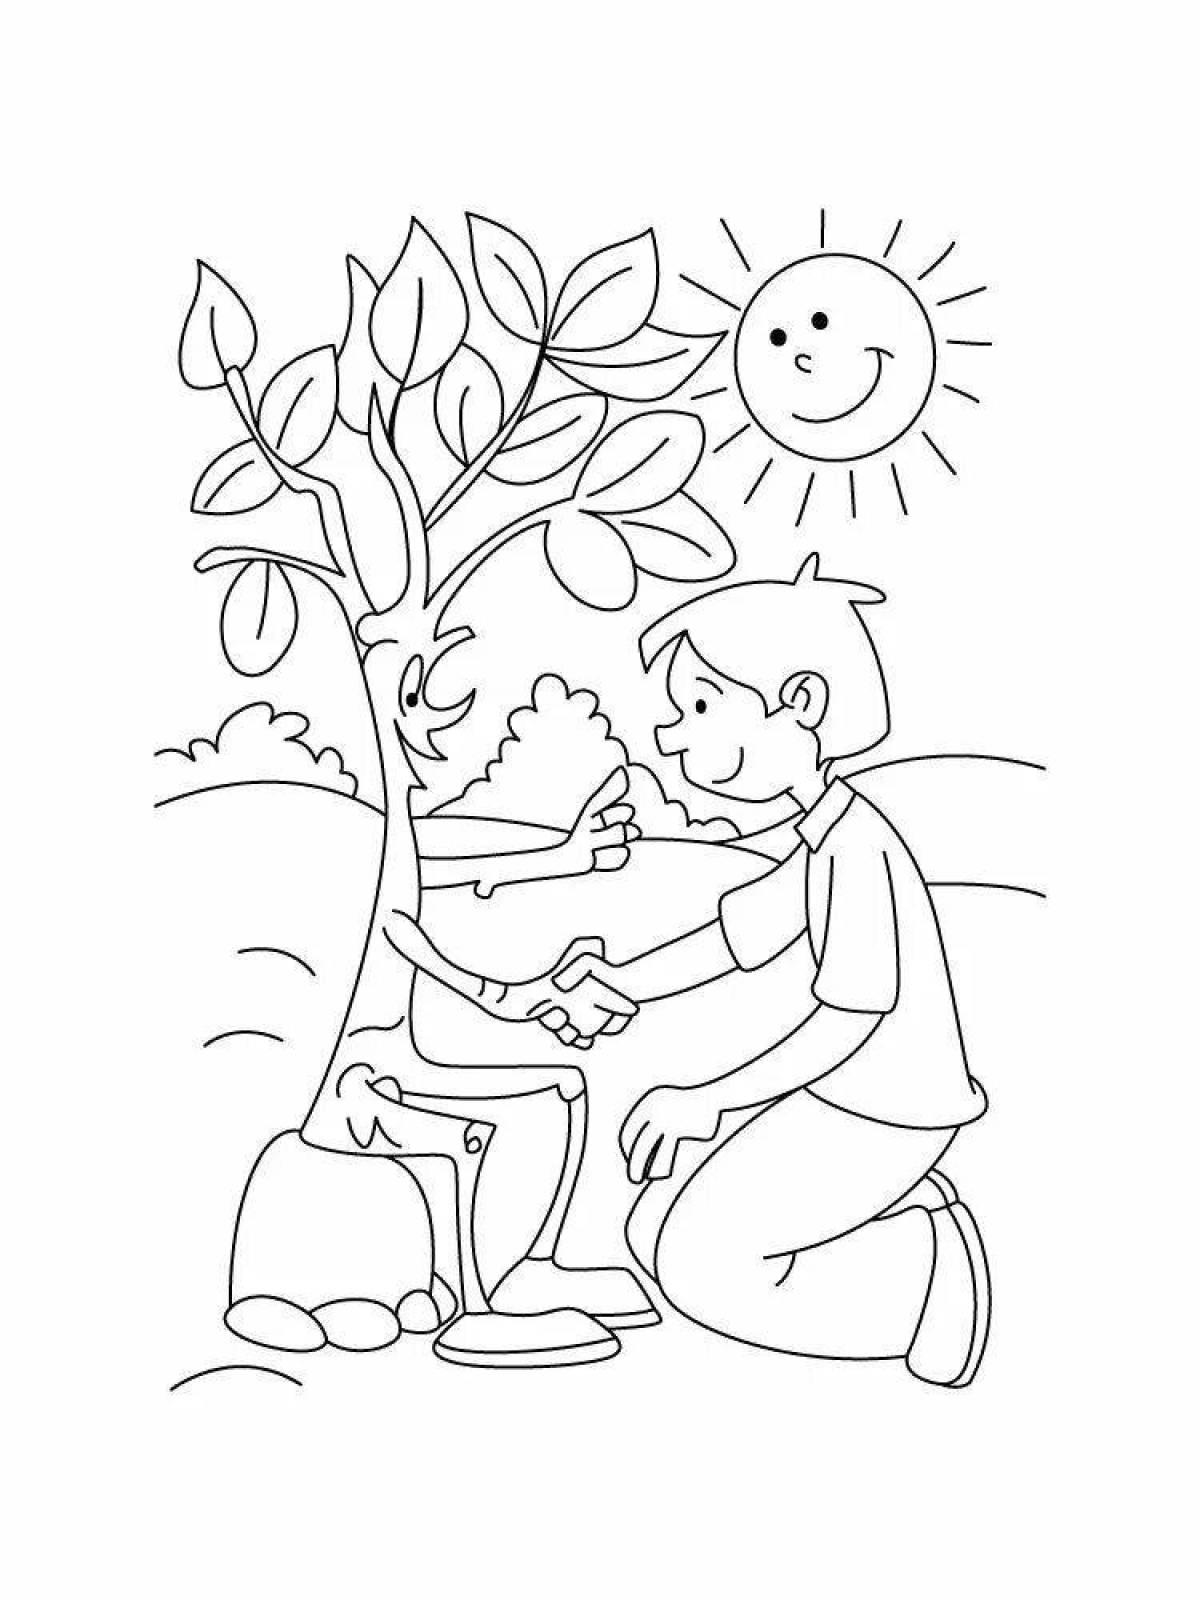 Shining Protection of Nature coloring page